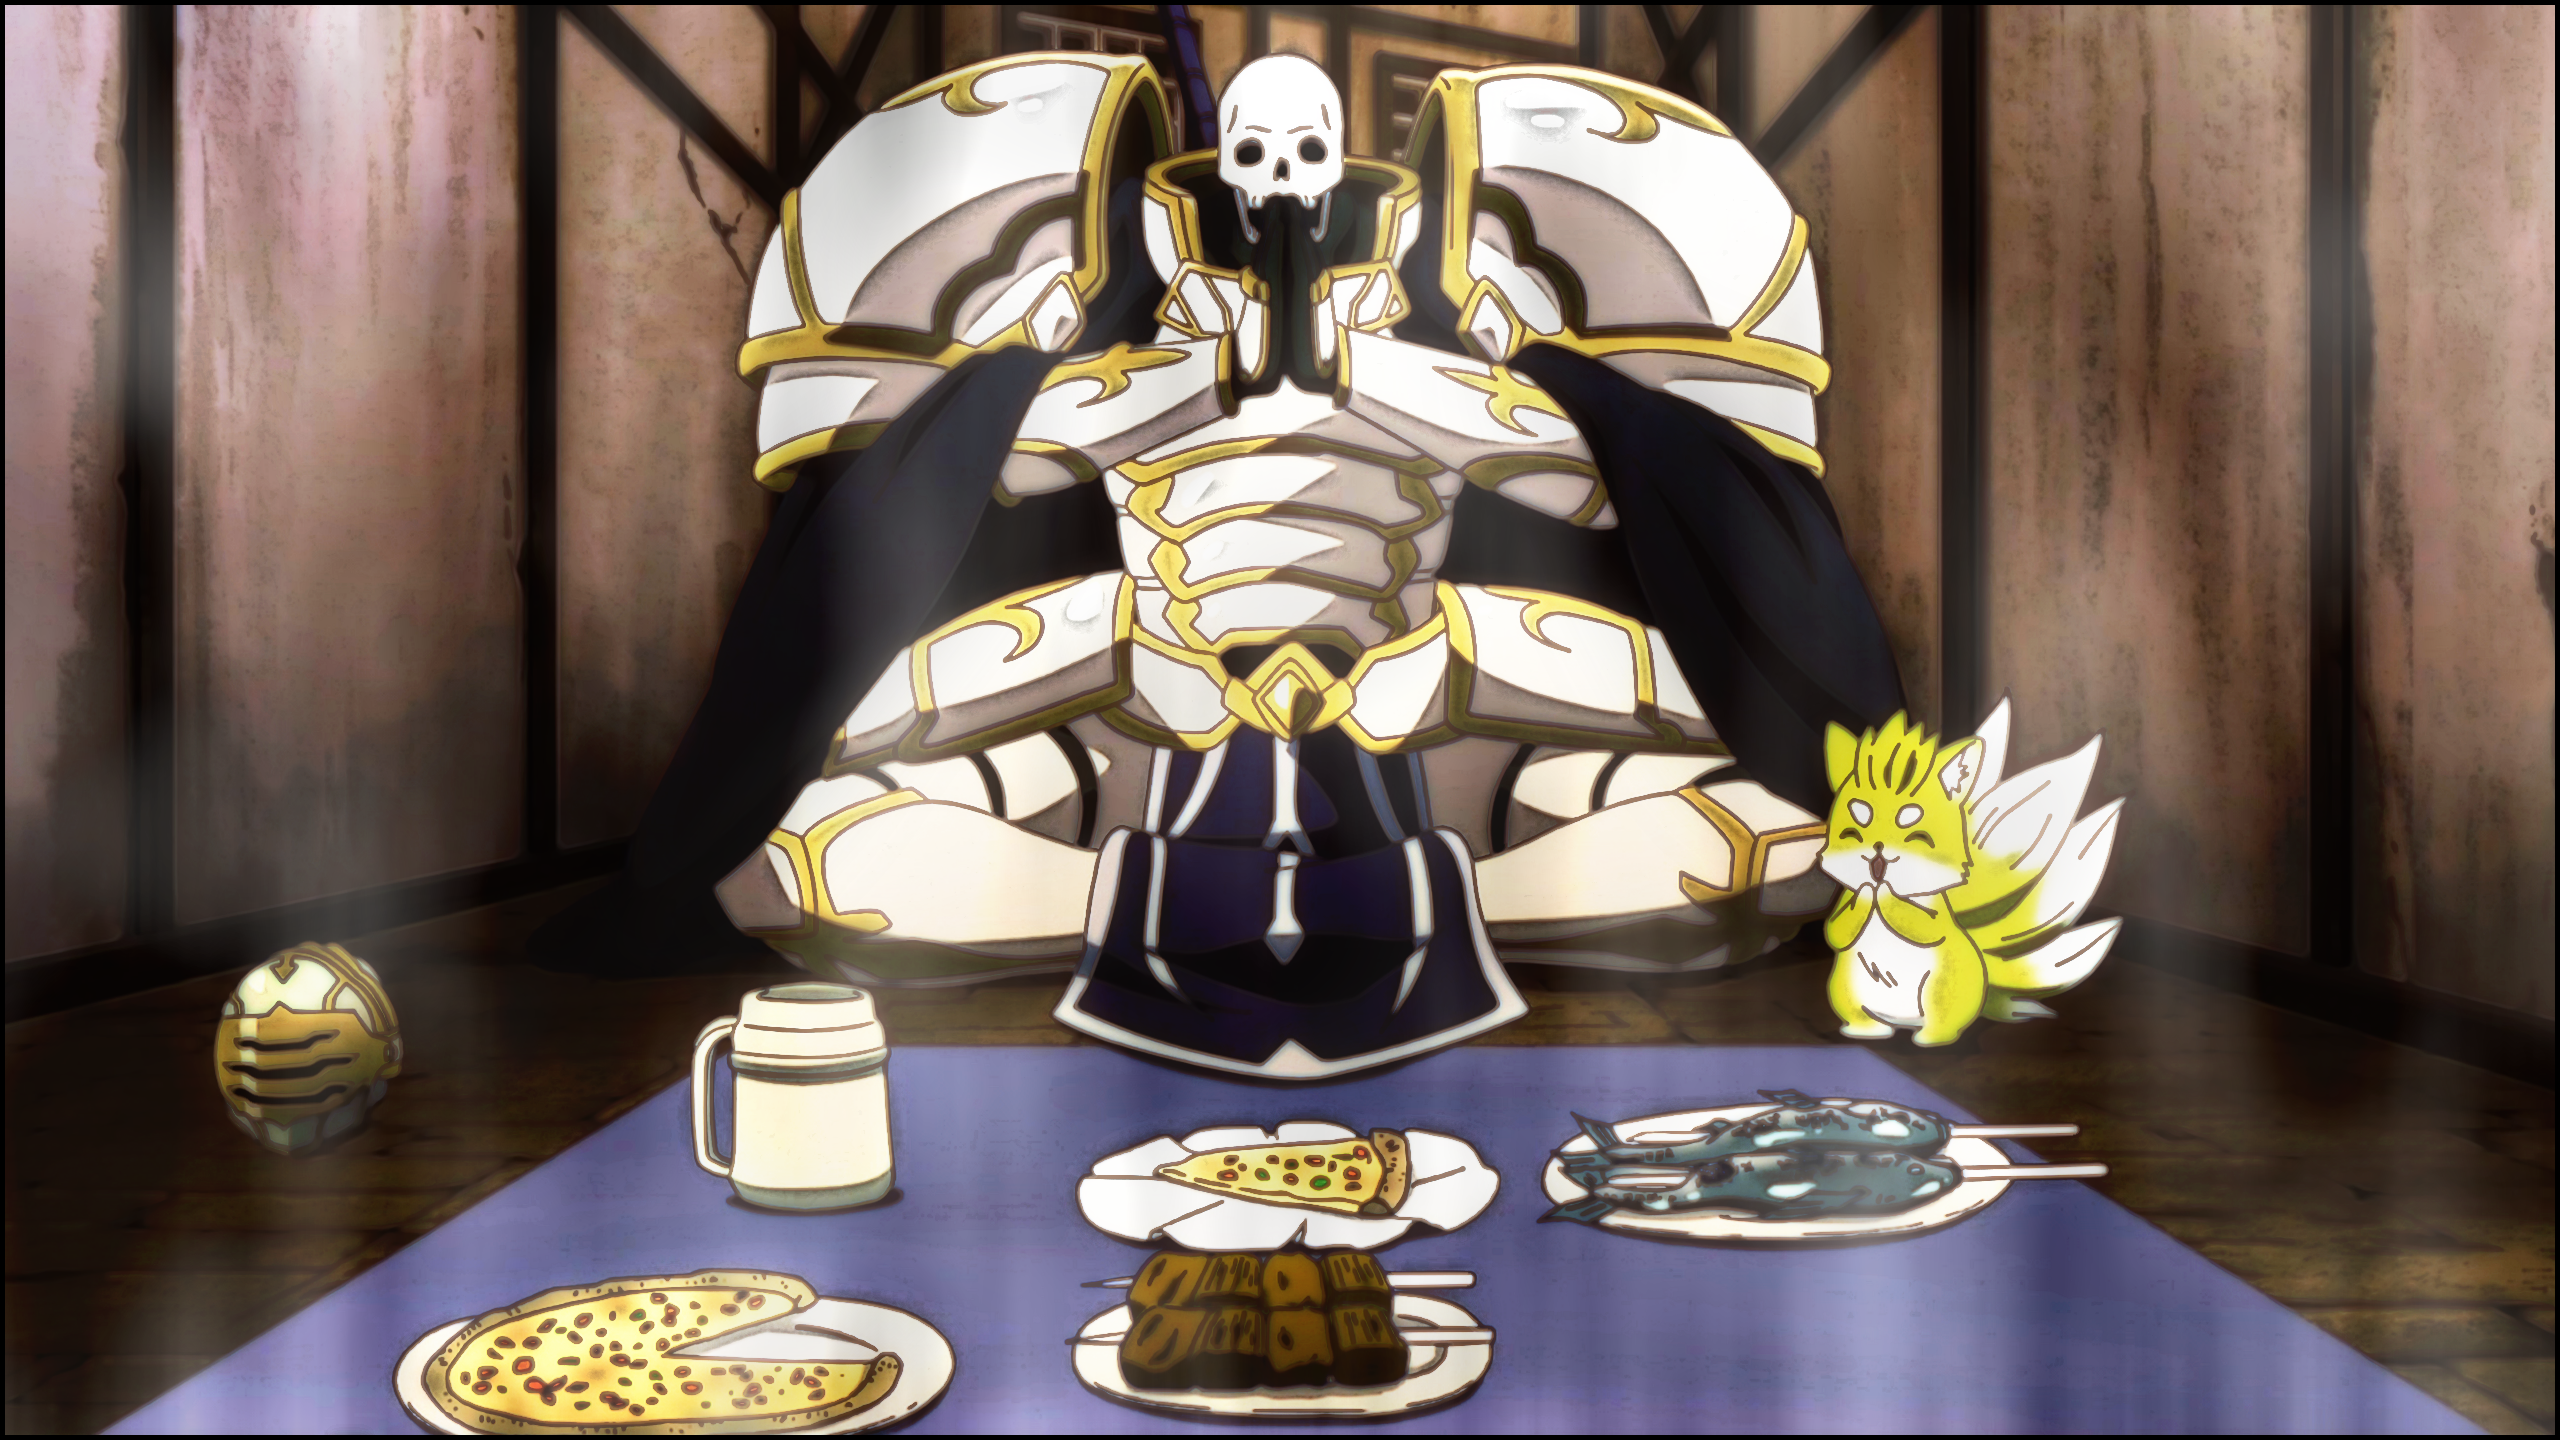 Anime 2560x1440 Skeleton Knight in Another World Isekai anime food armor anime creatures